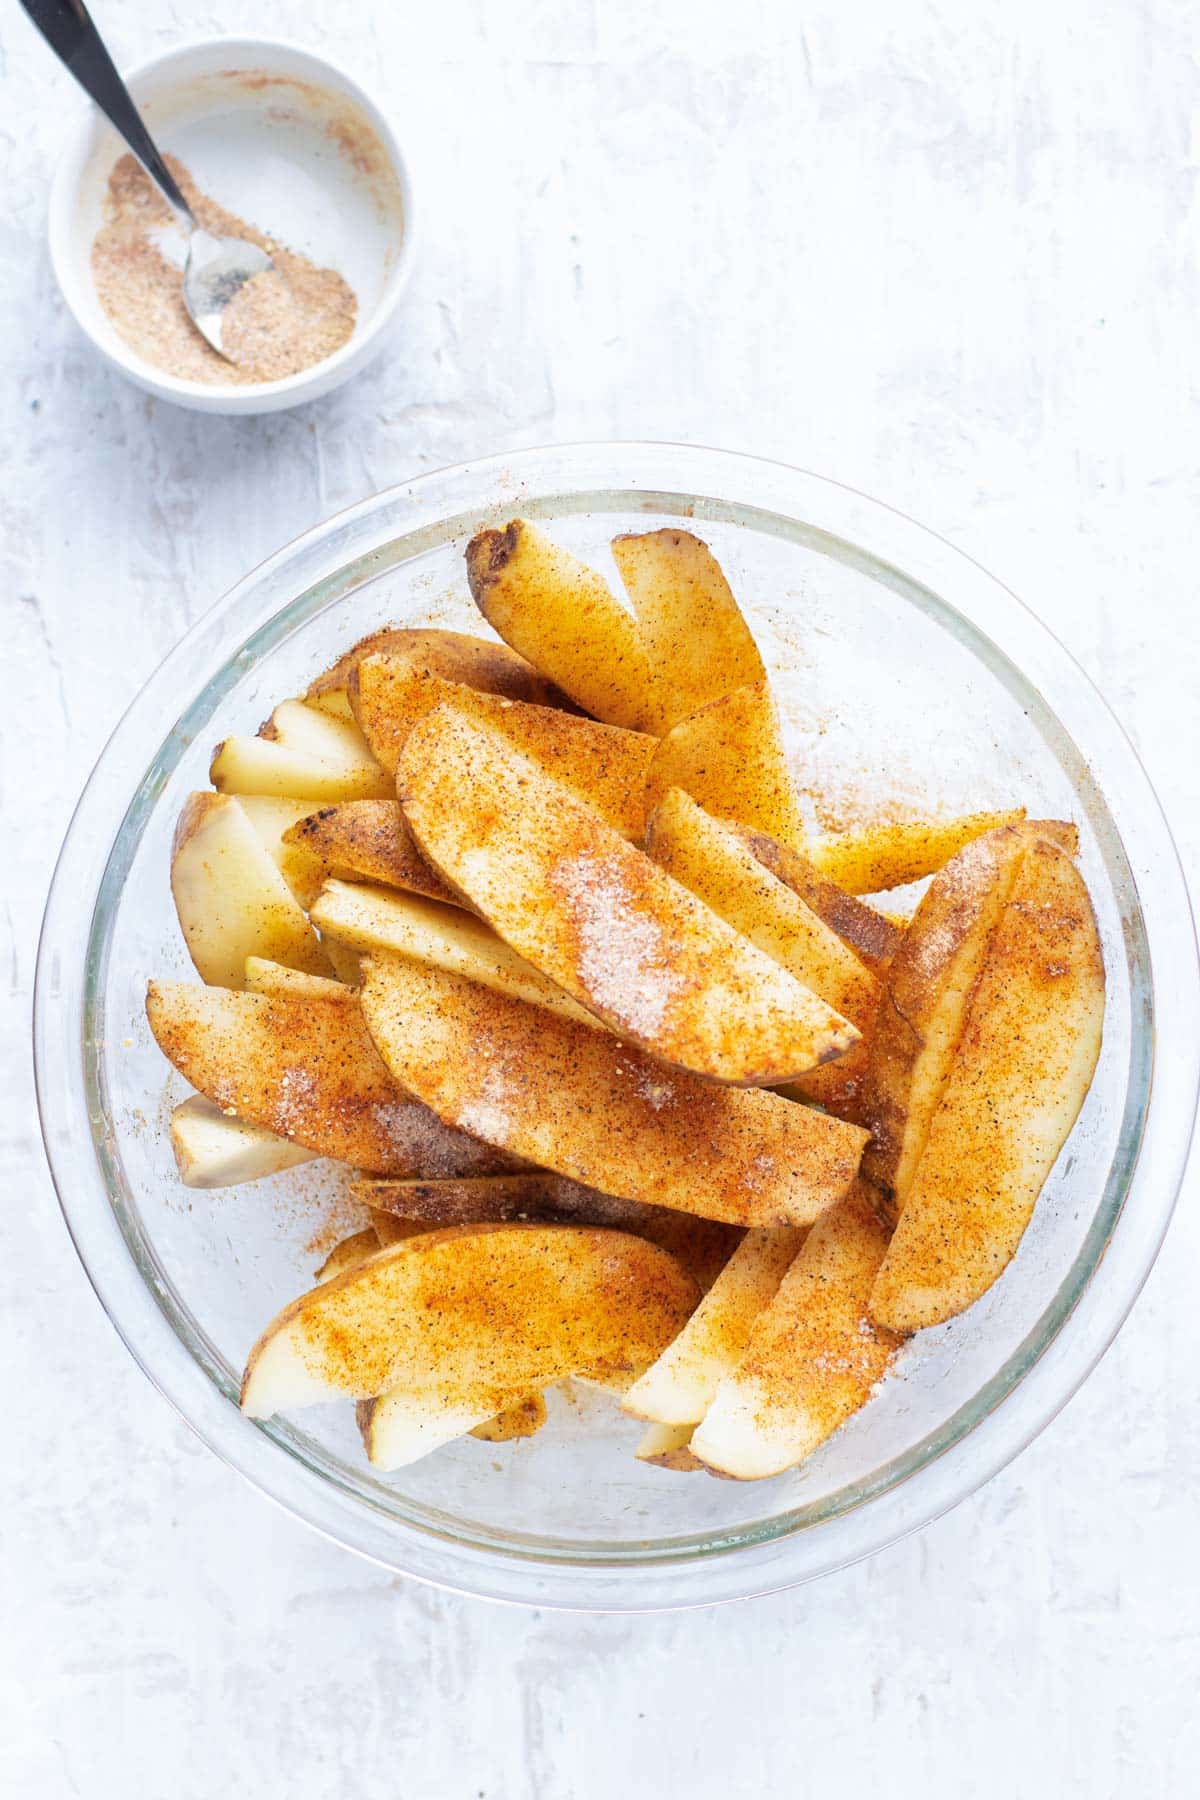 A bowl of Russet potatoes that have been cut into wedges and are being tossed with a seasoning blend.